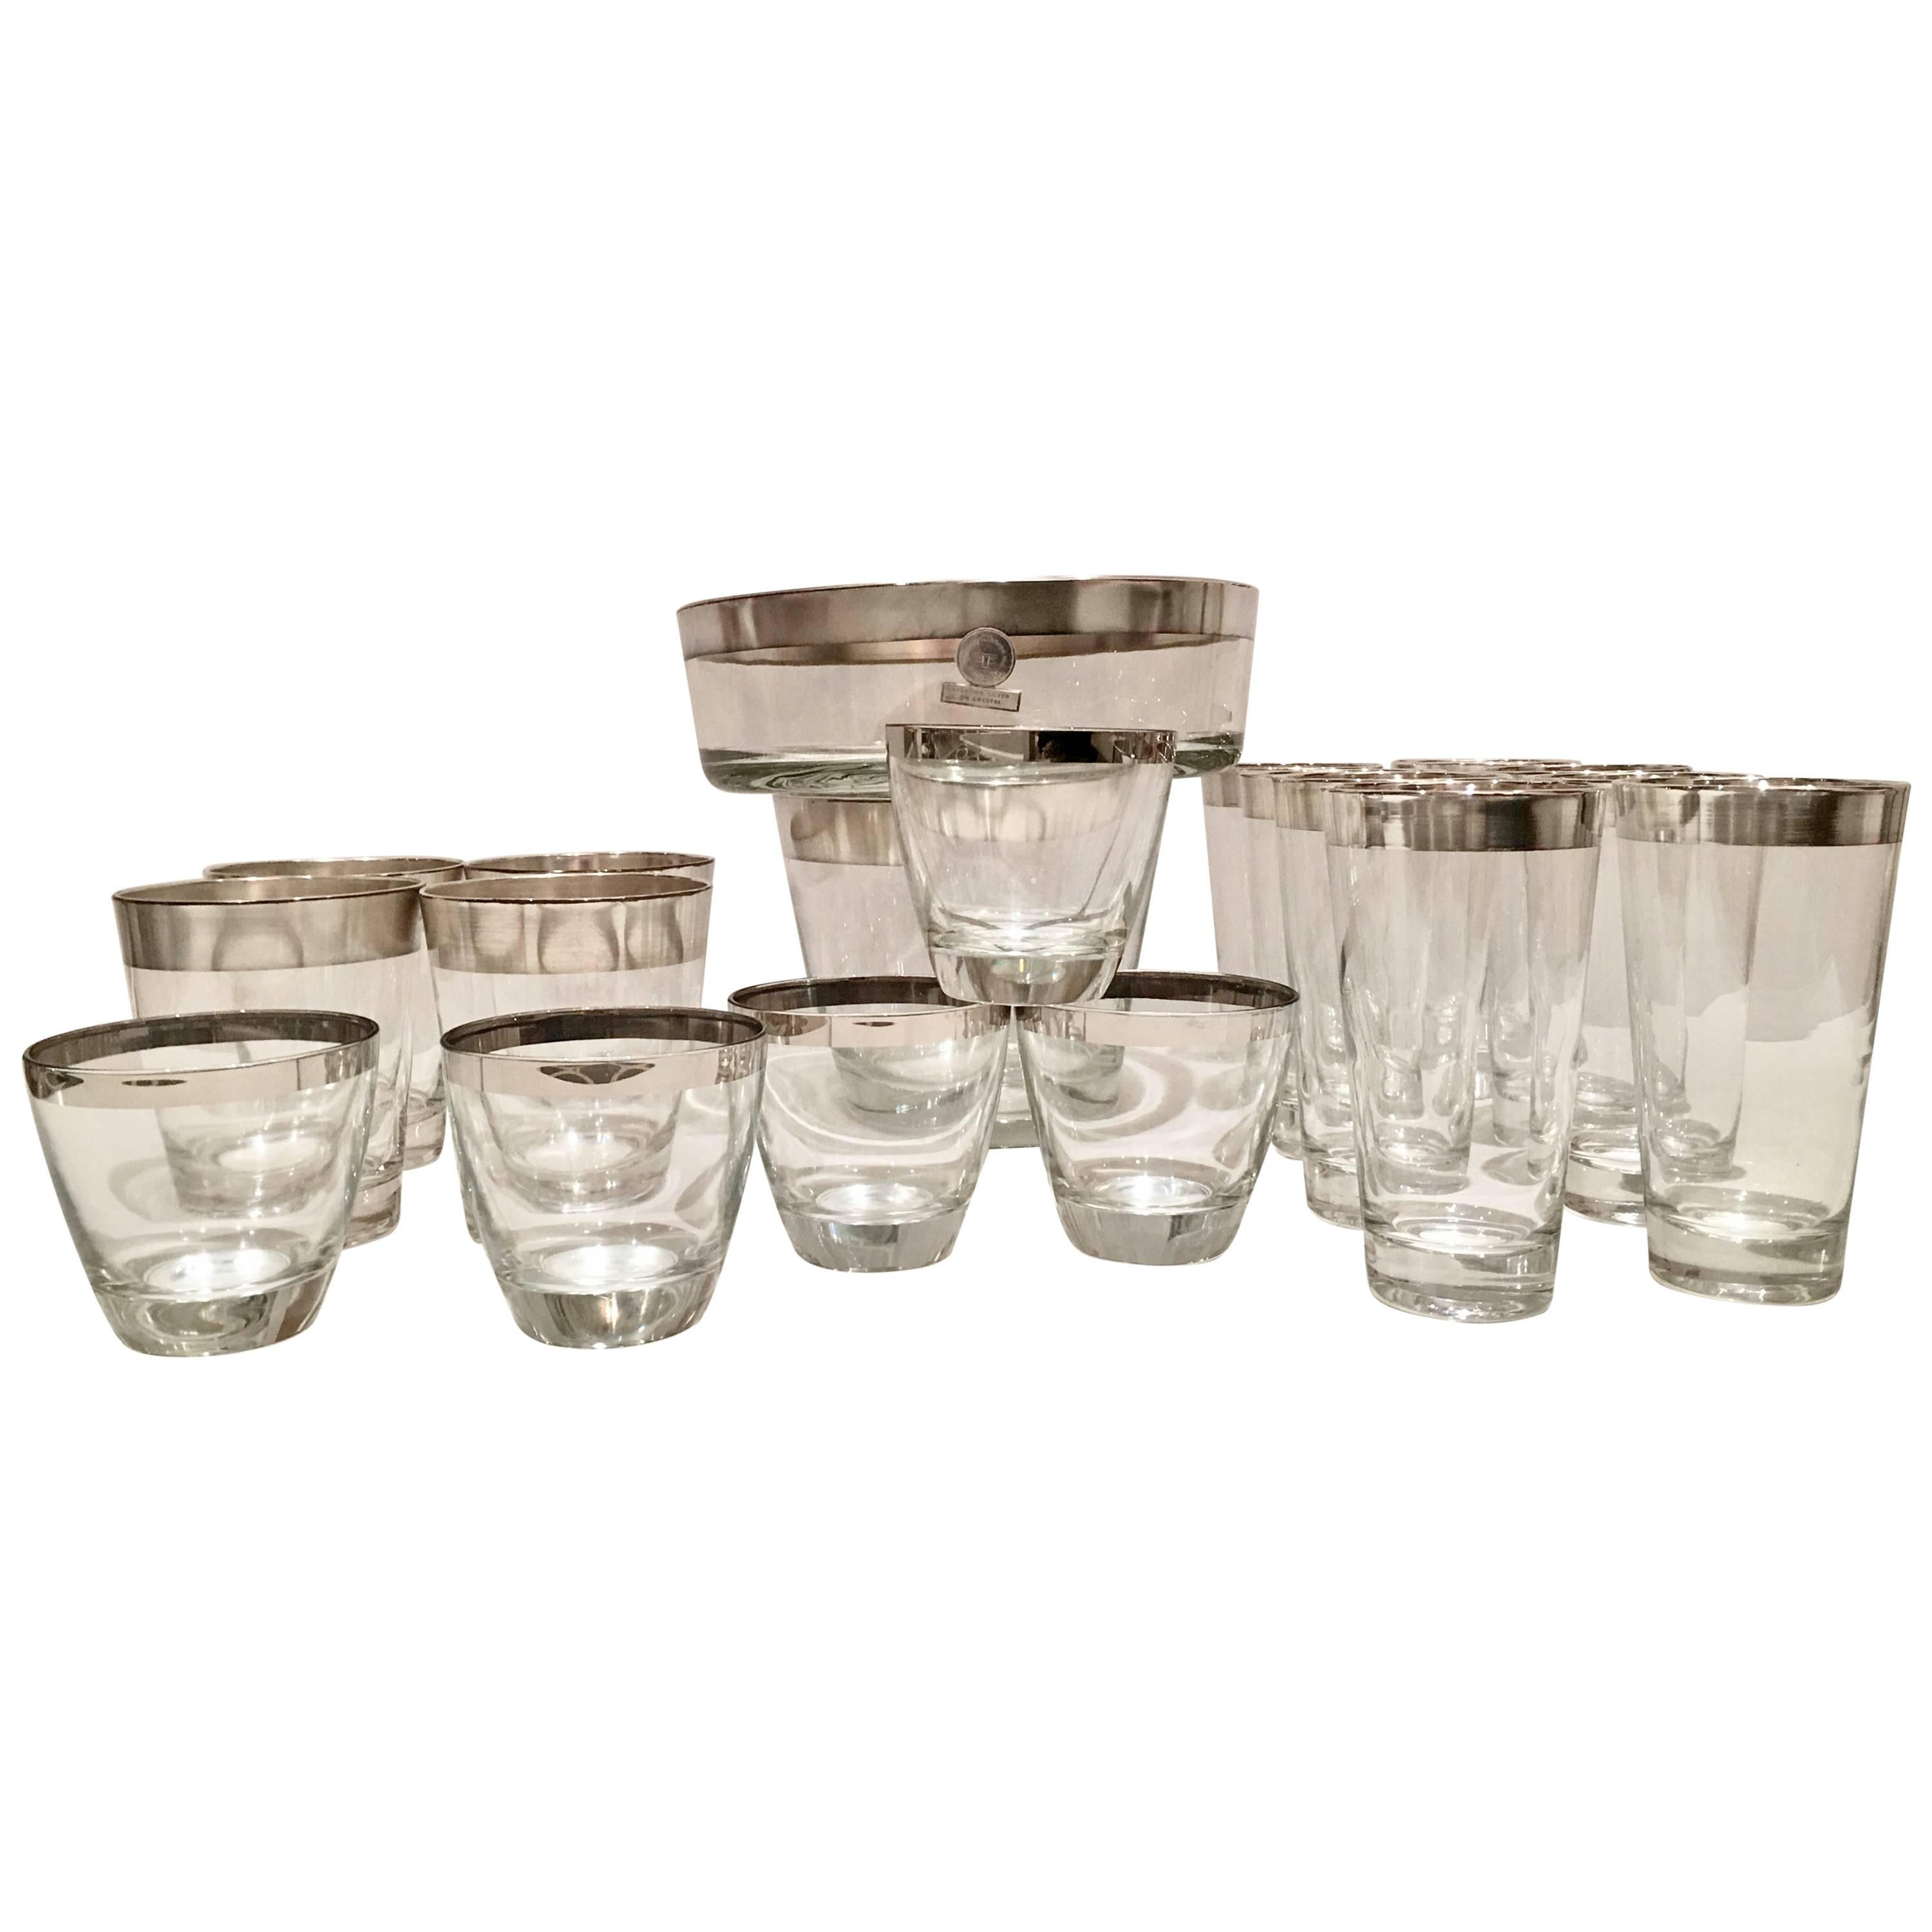 Dorothy Thorpe Sterling Silver Overlay Drinks Set of 19 Pieces